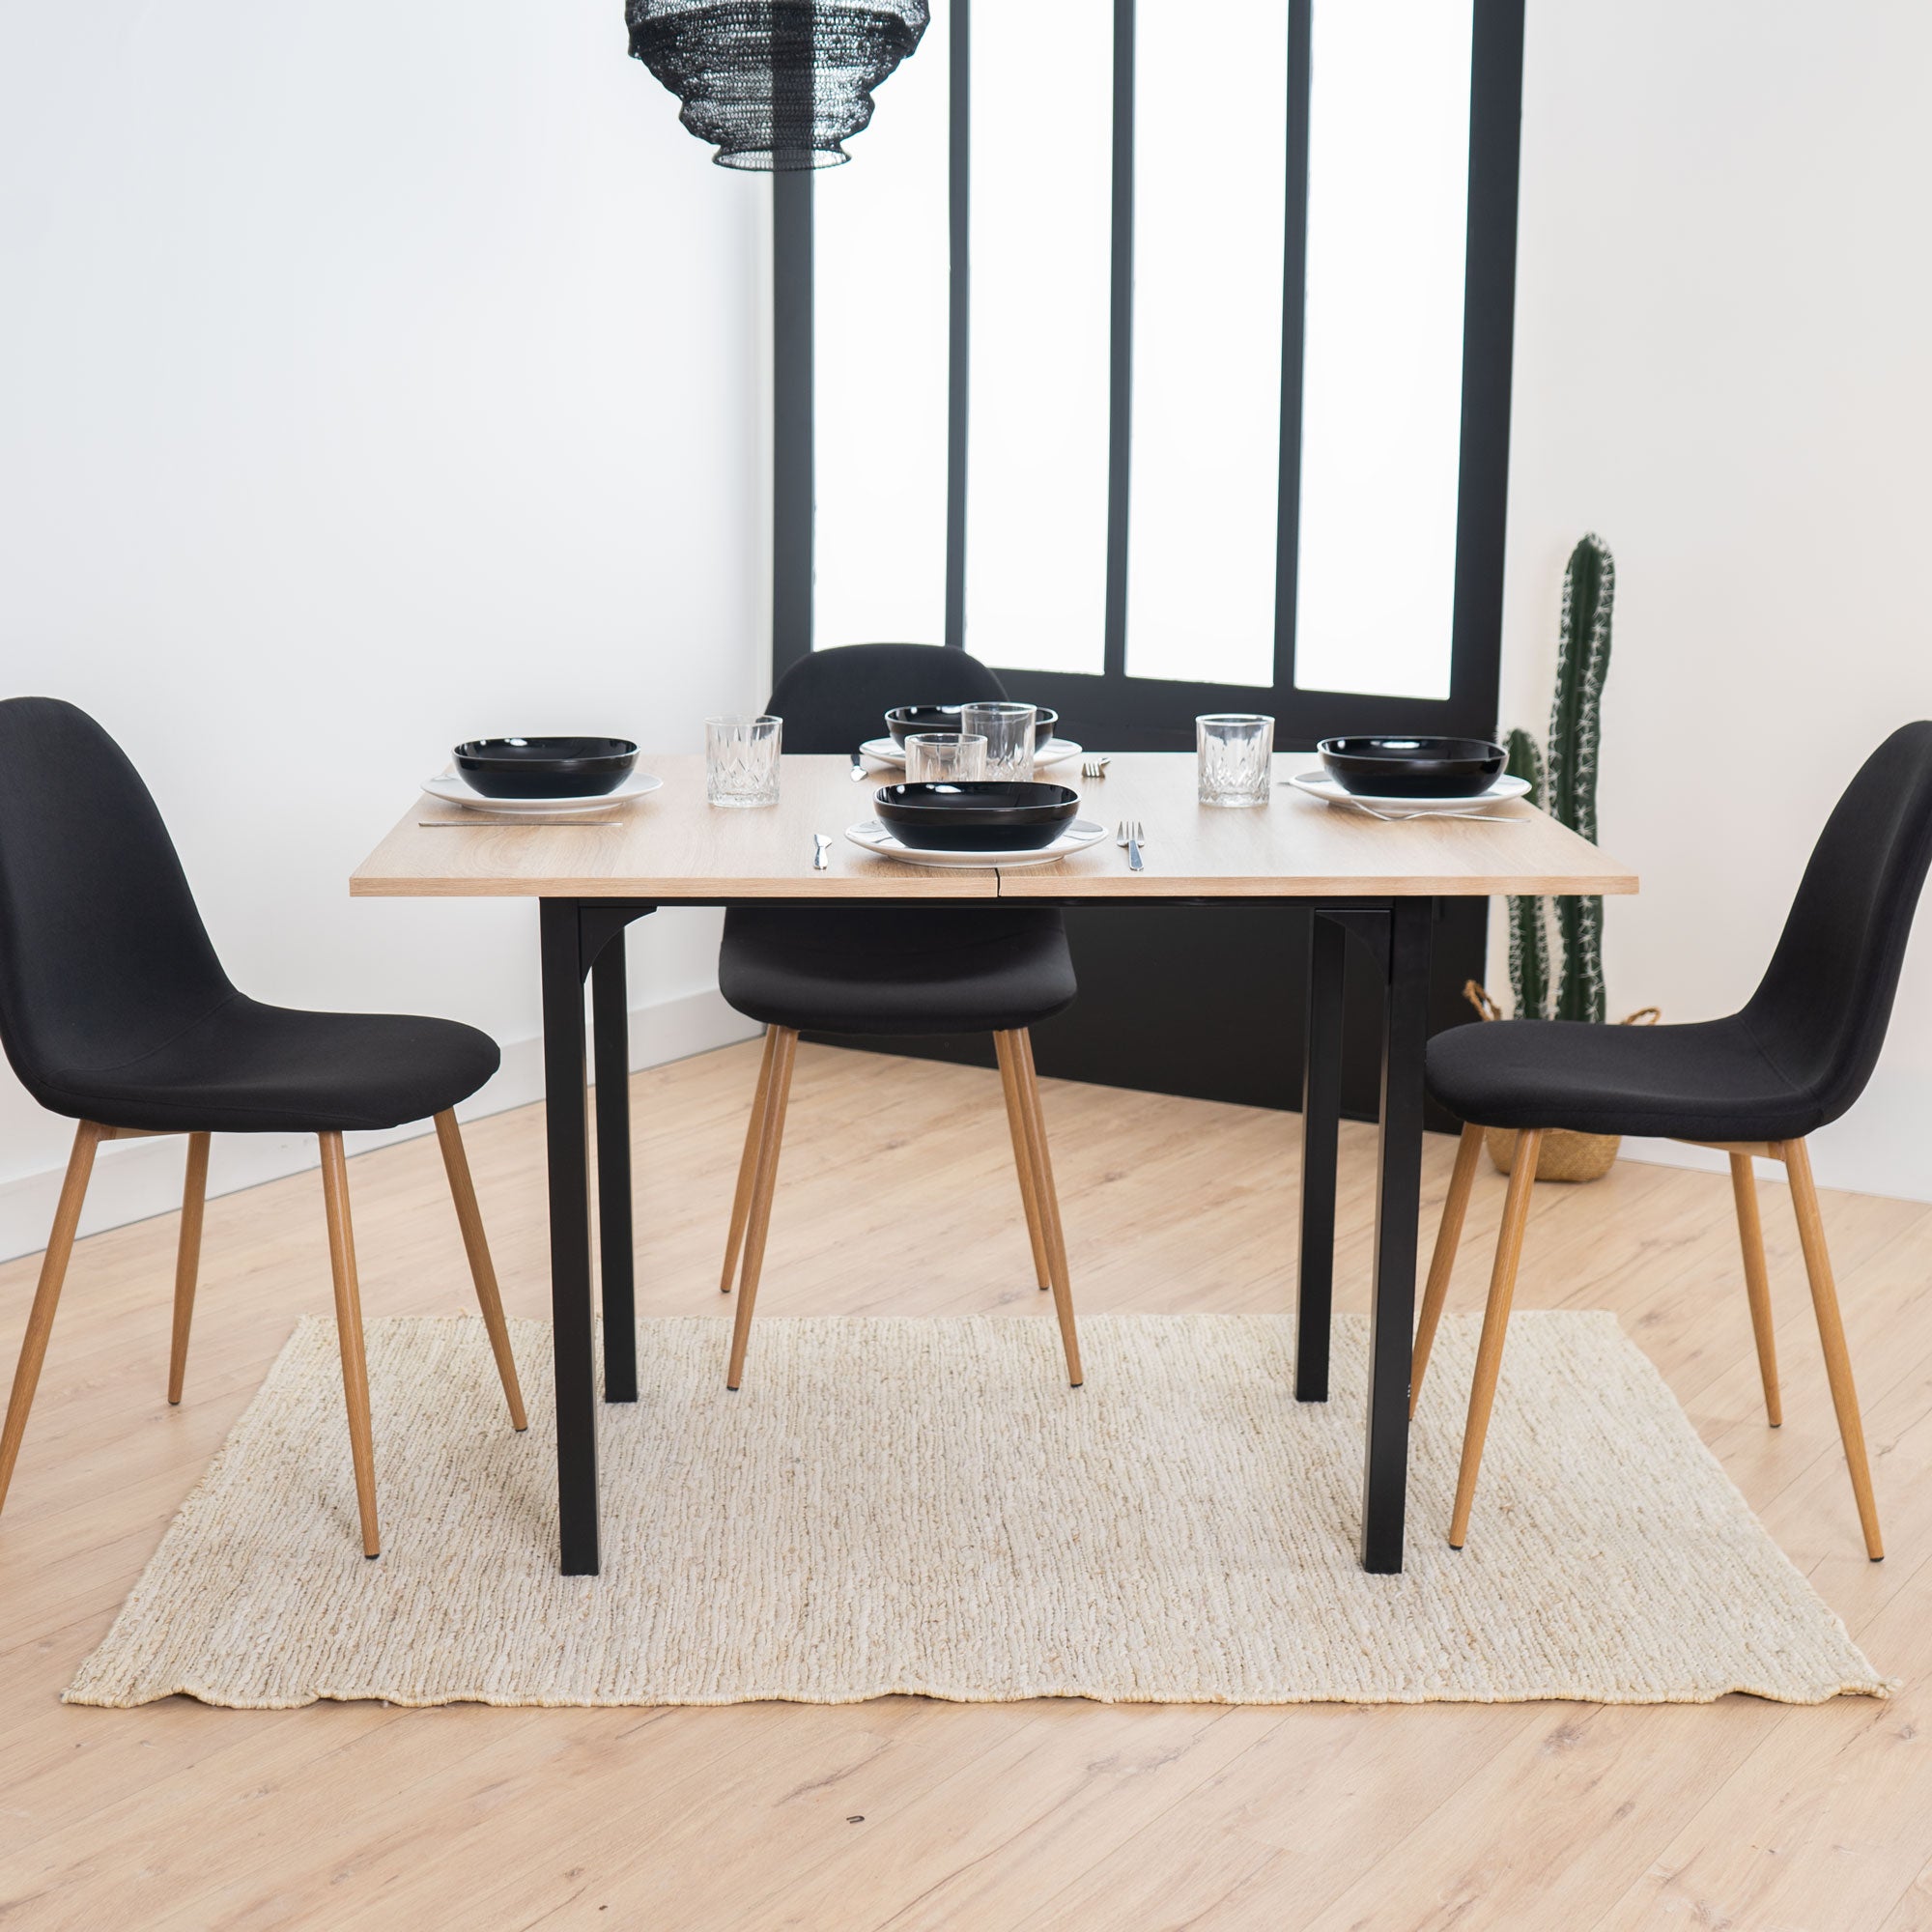 Extendable dining table perfect for small spaces in metal wood 2 to 4 people - MARLOWE WOOD